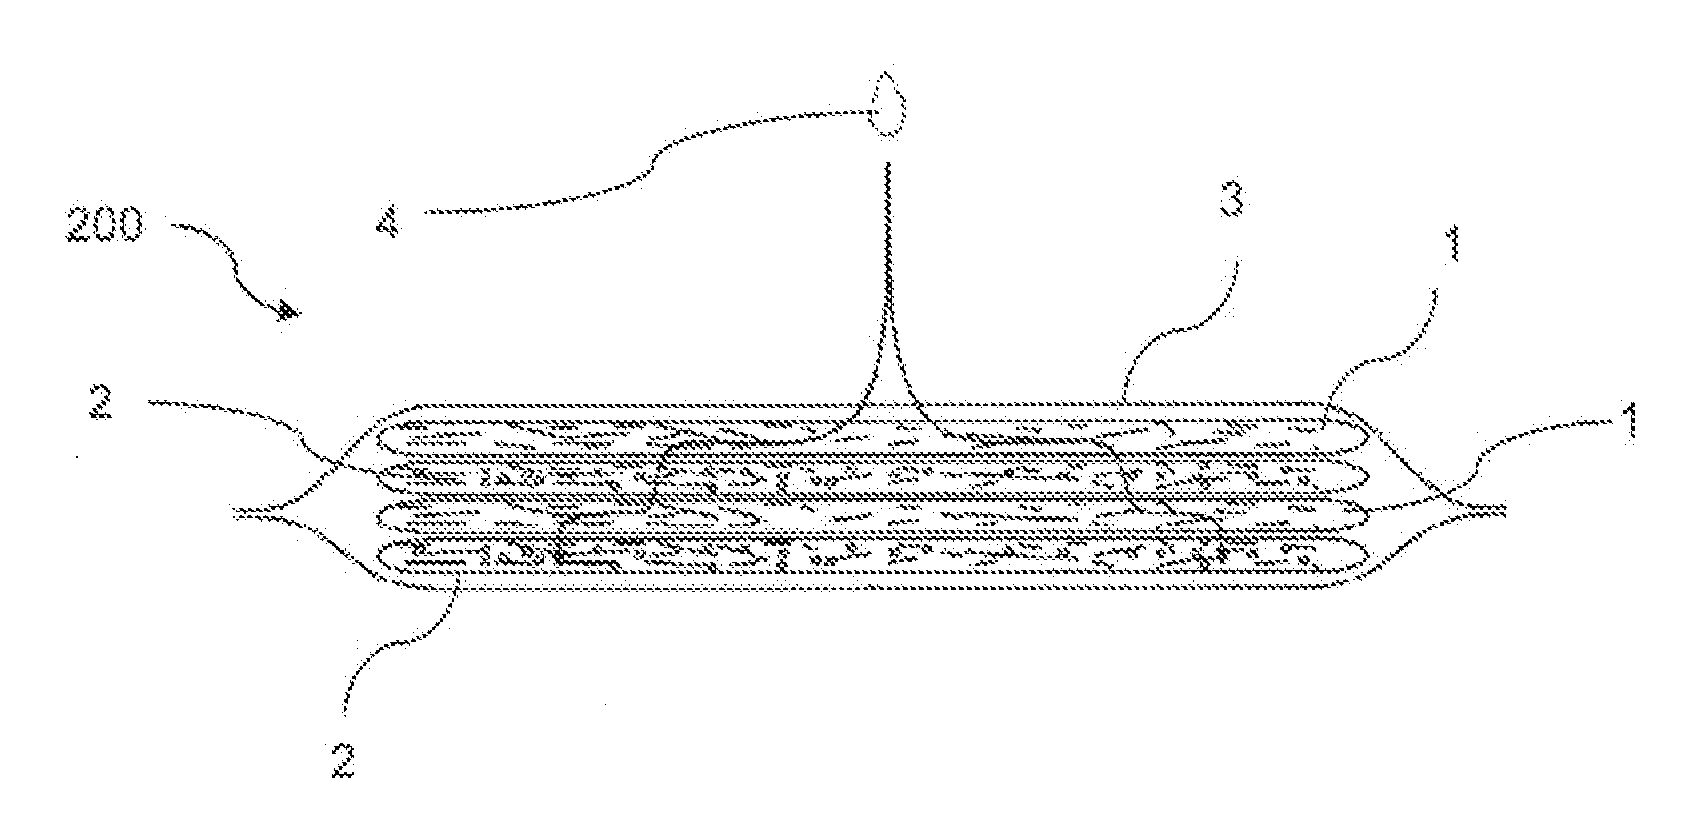 Wound care article, comprising a portion of modified natural fibers or synthetic fibers